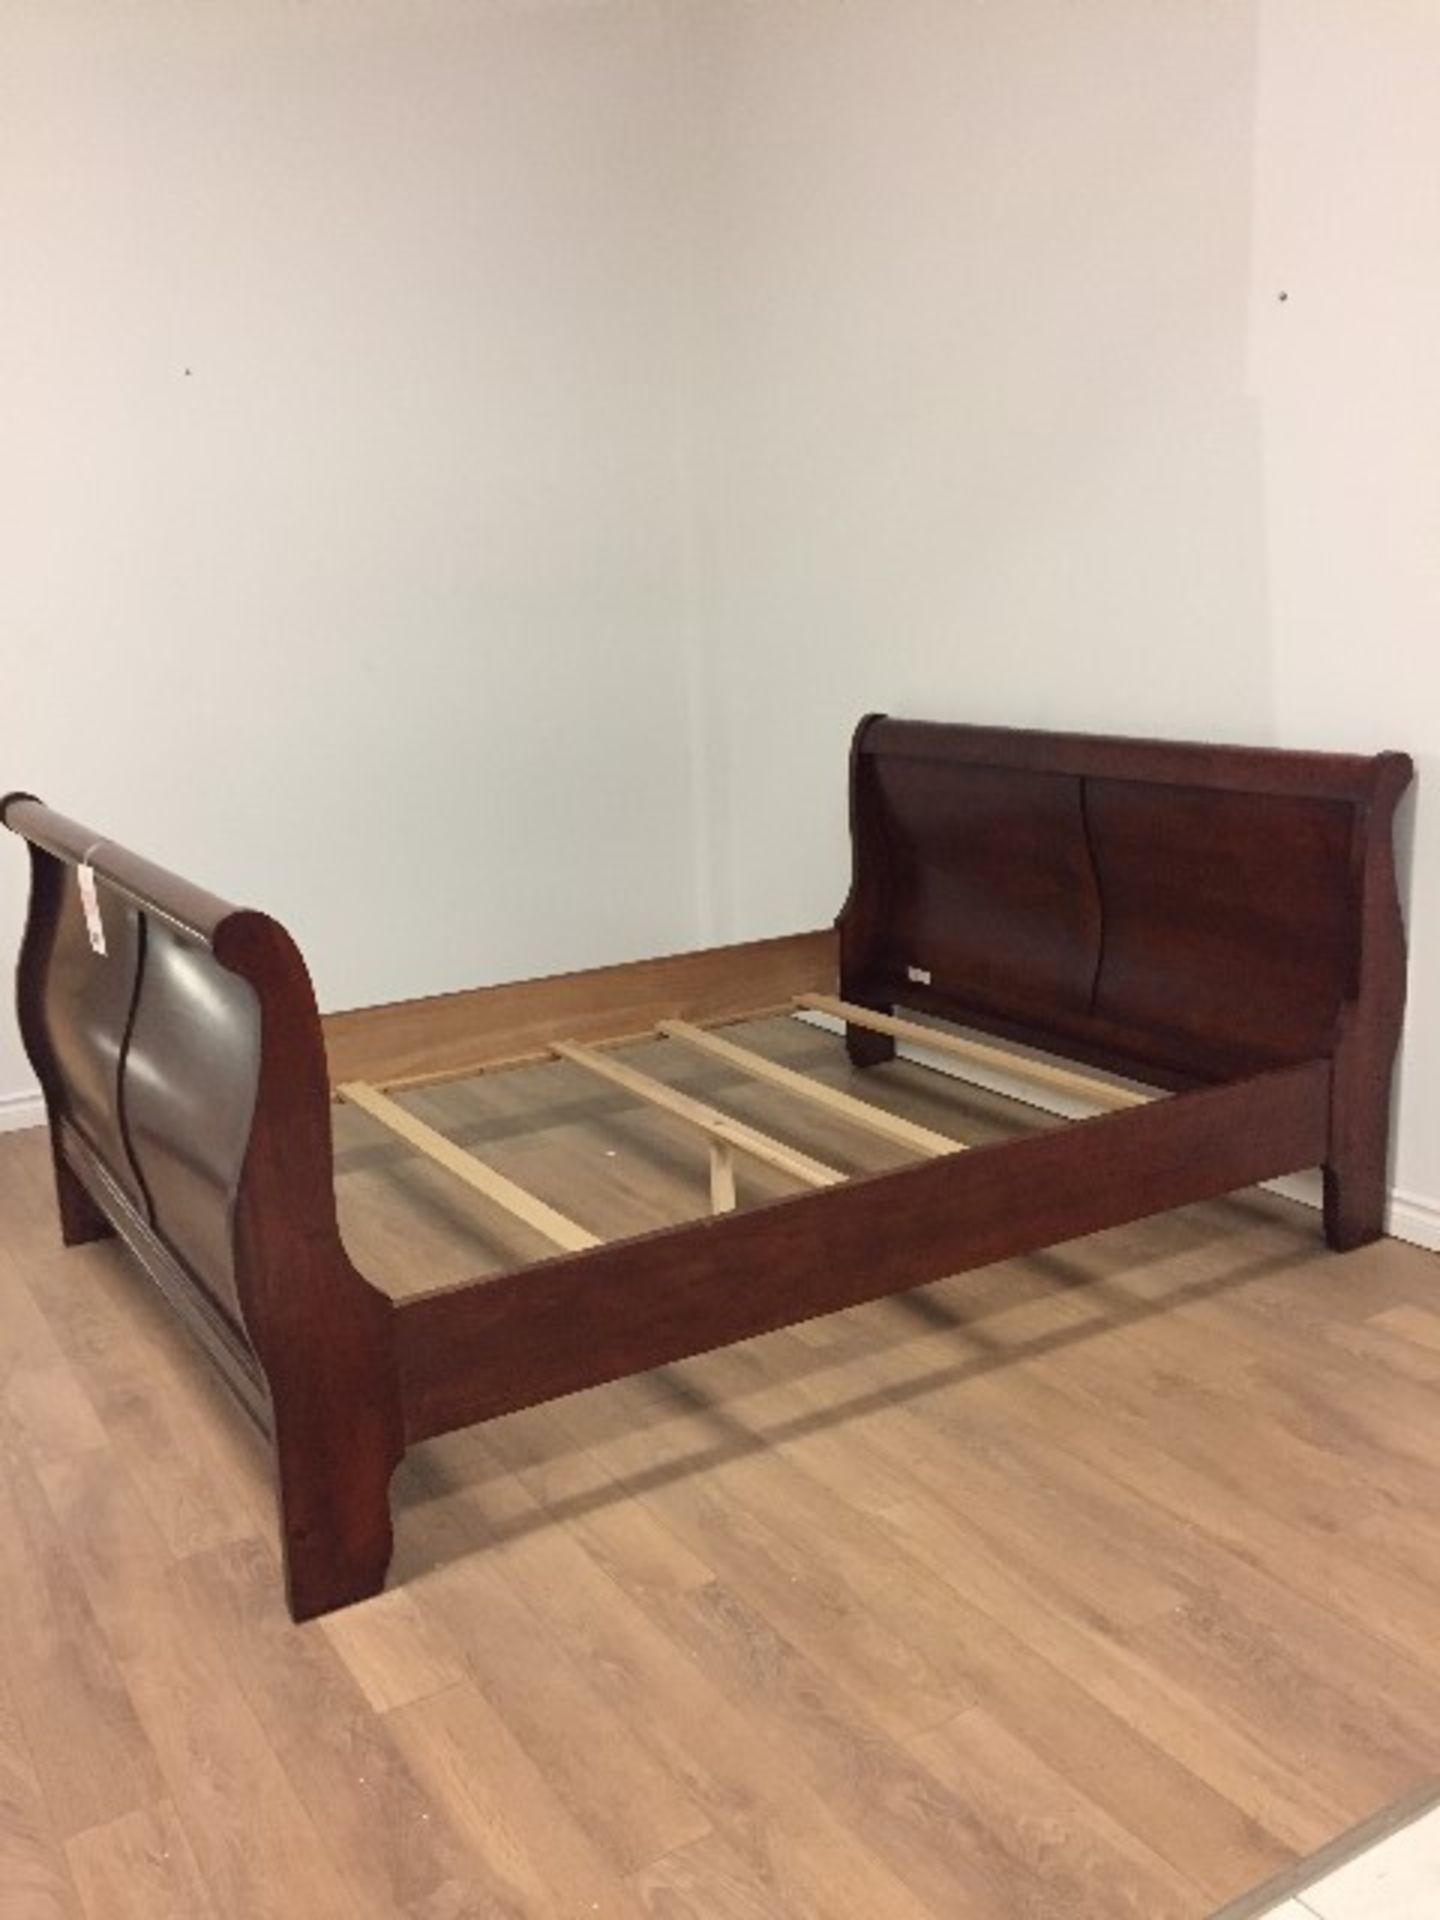 Queen Bed (Warehouse overstock/parts as is/telquel) - Image 2 of 2